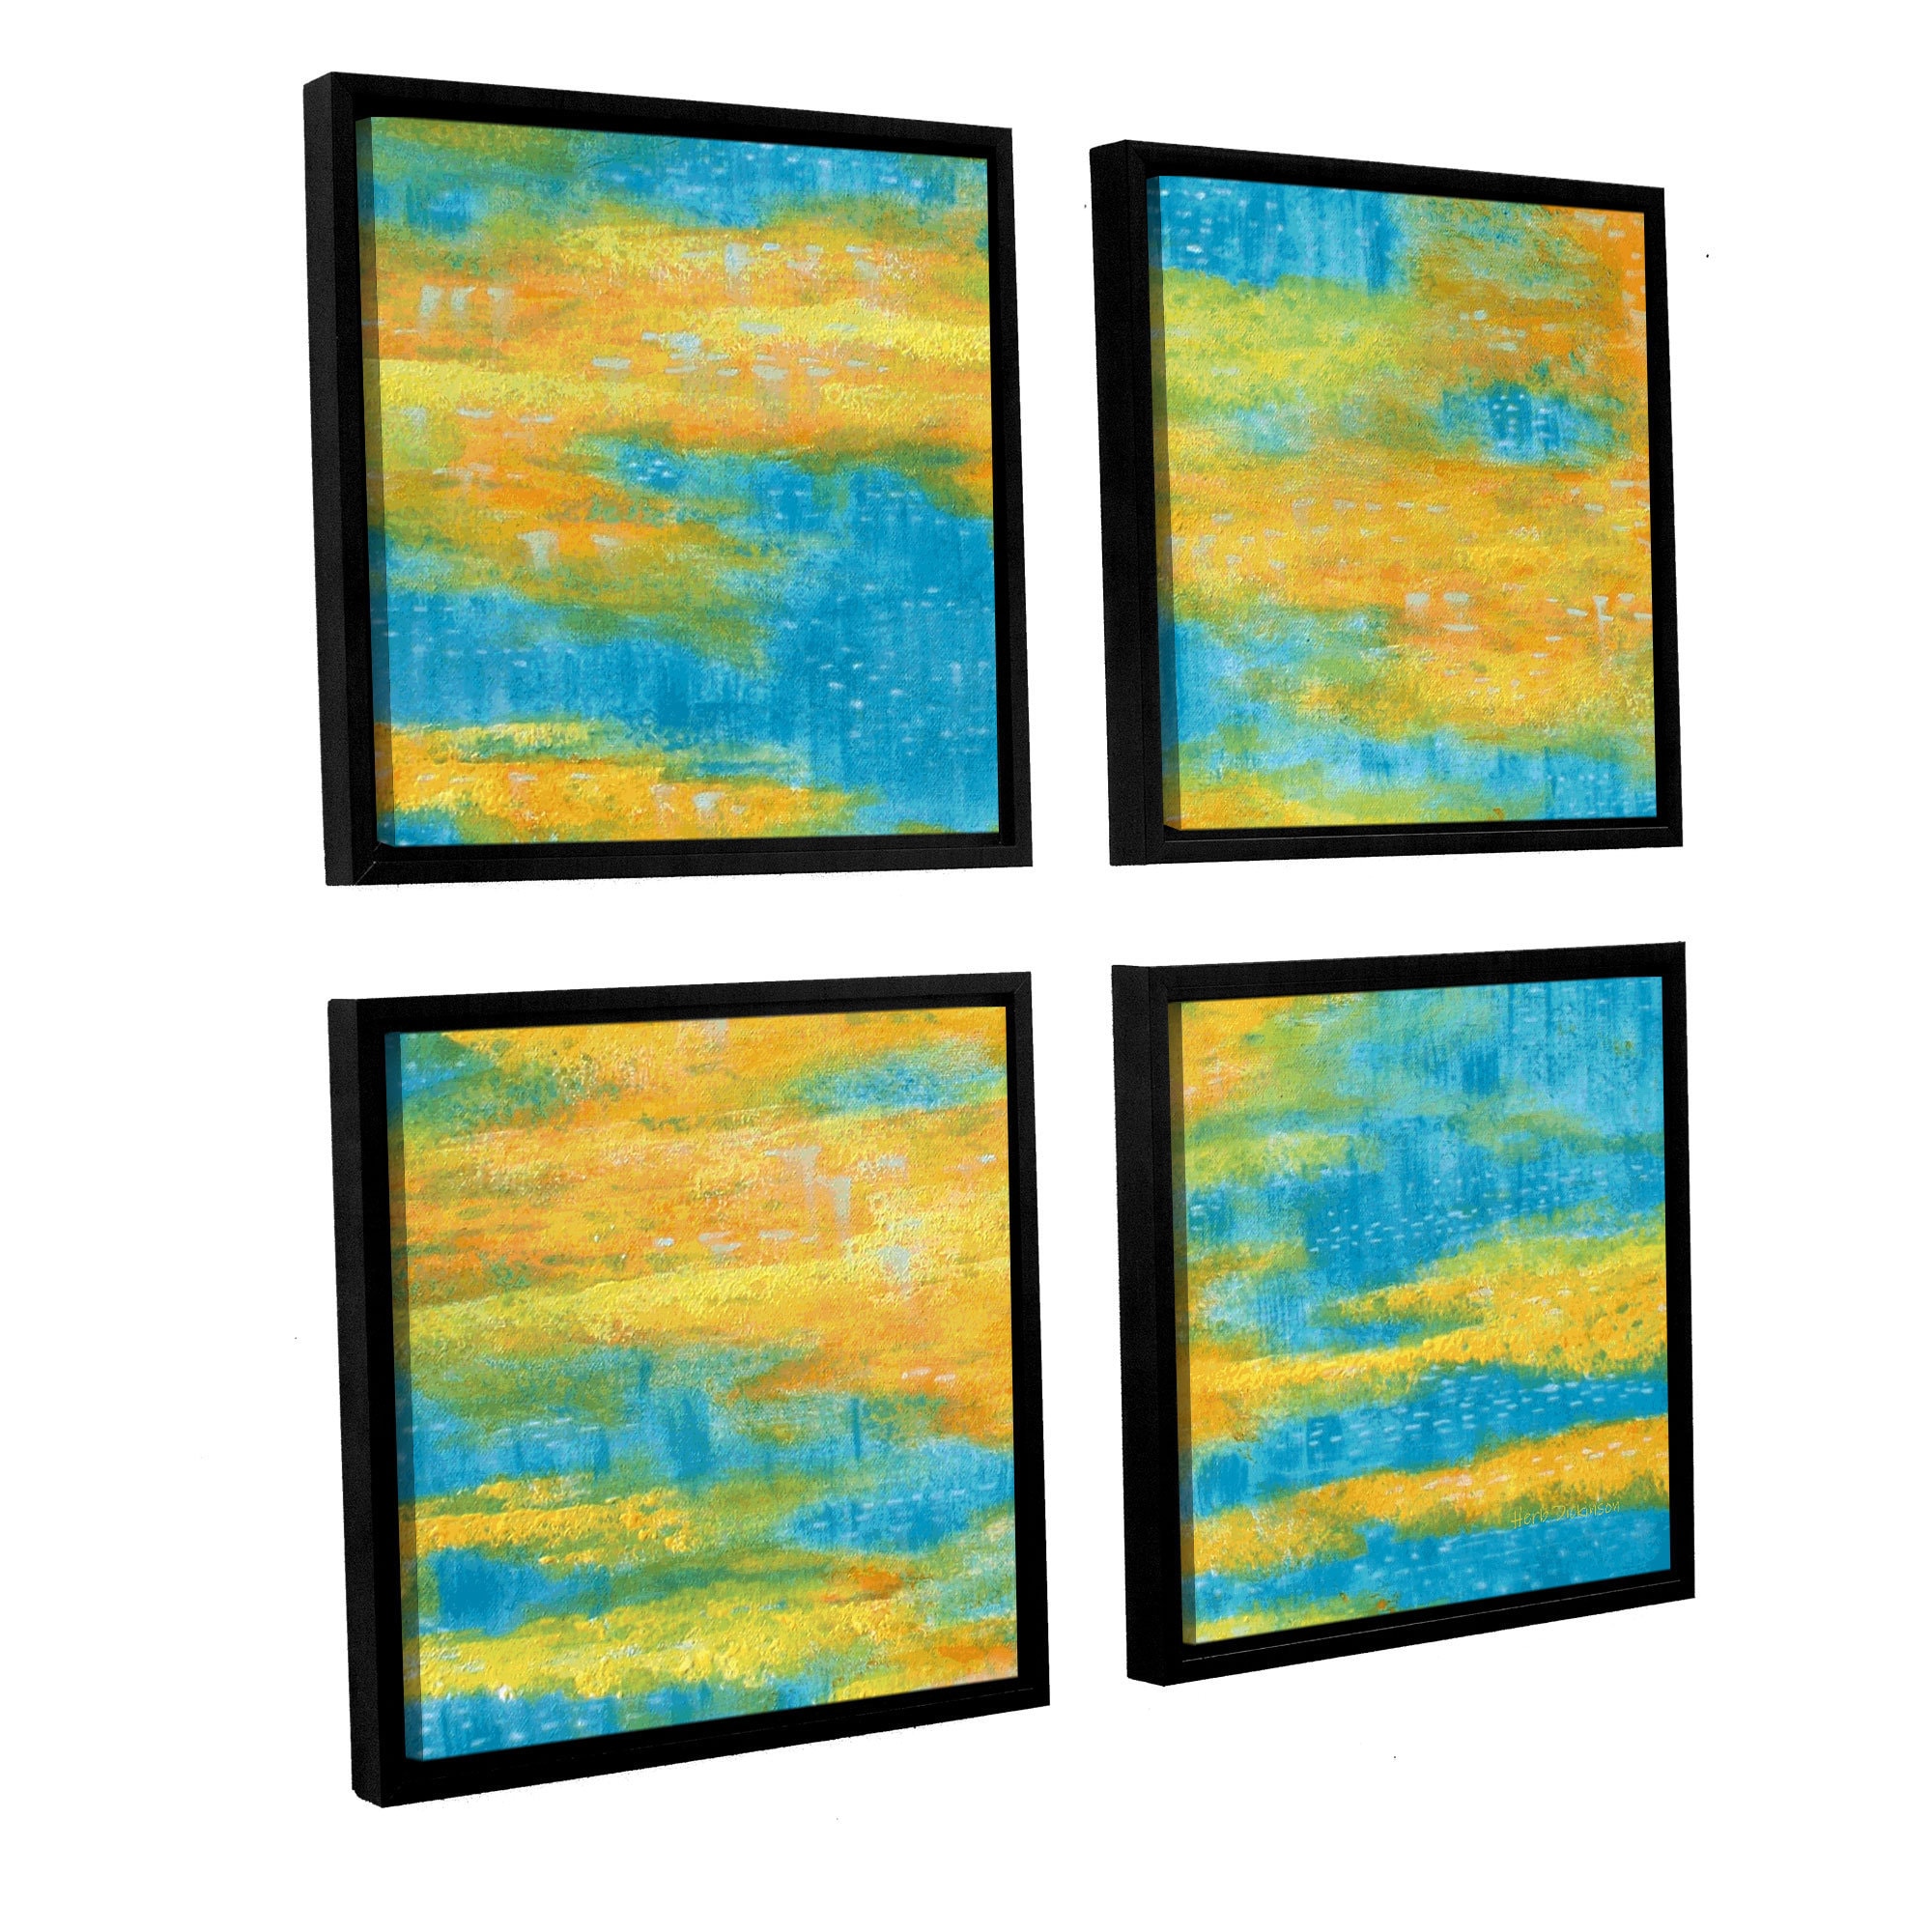 ArtWall 4 Piece Herb Dickinsons Palms Away IV Floater Framed Canvas Square Set 36 x 36 